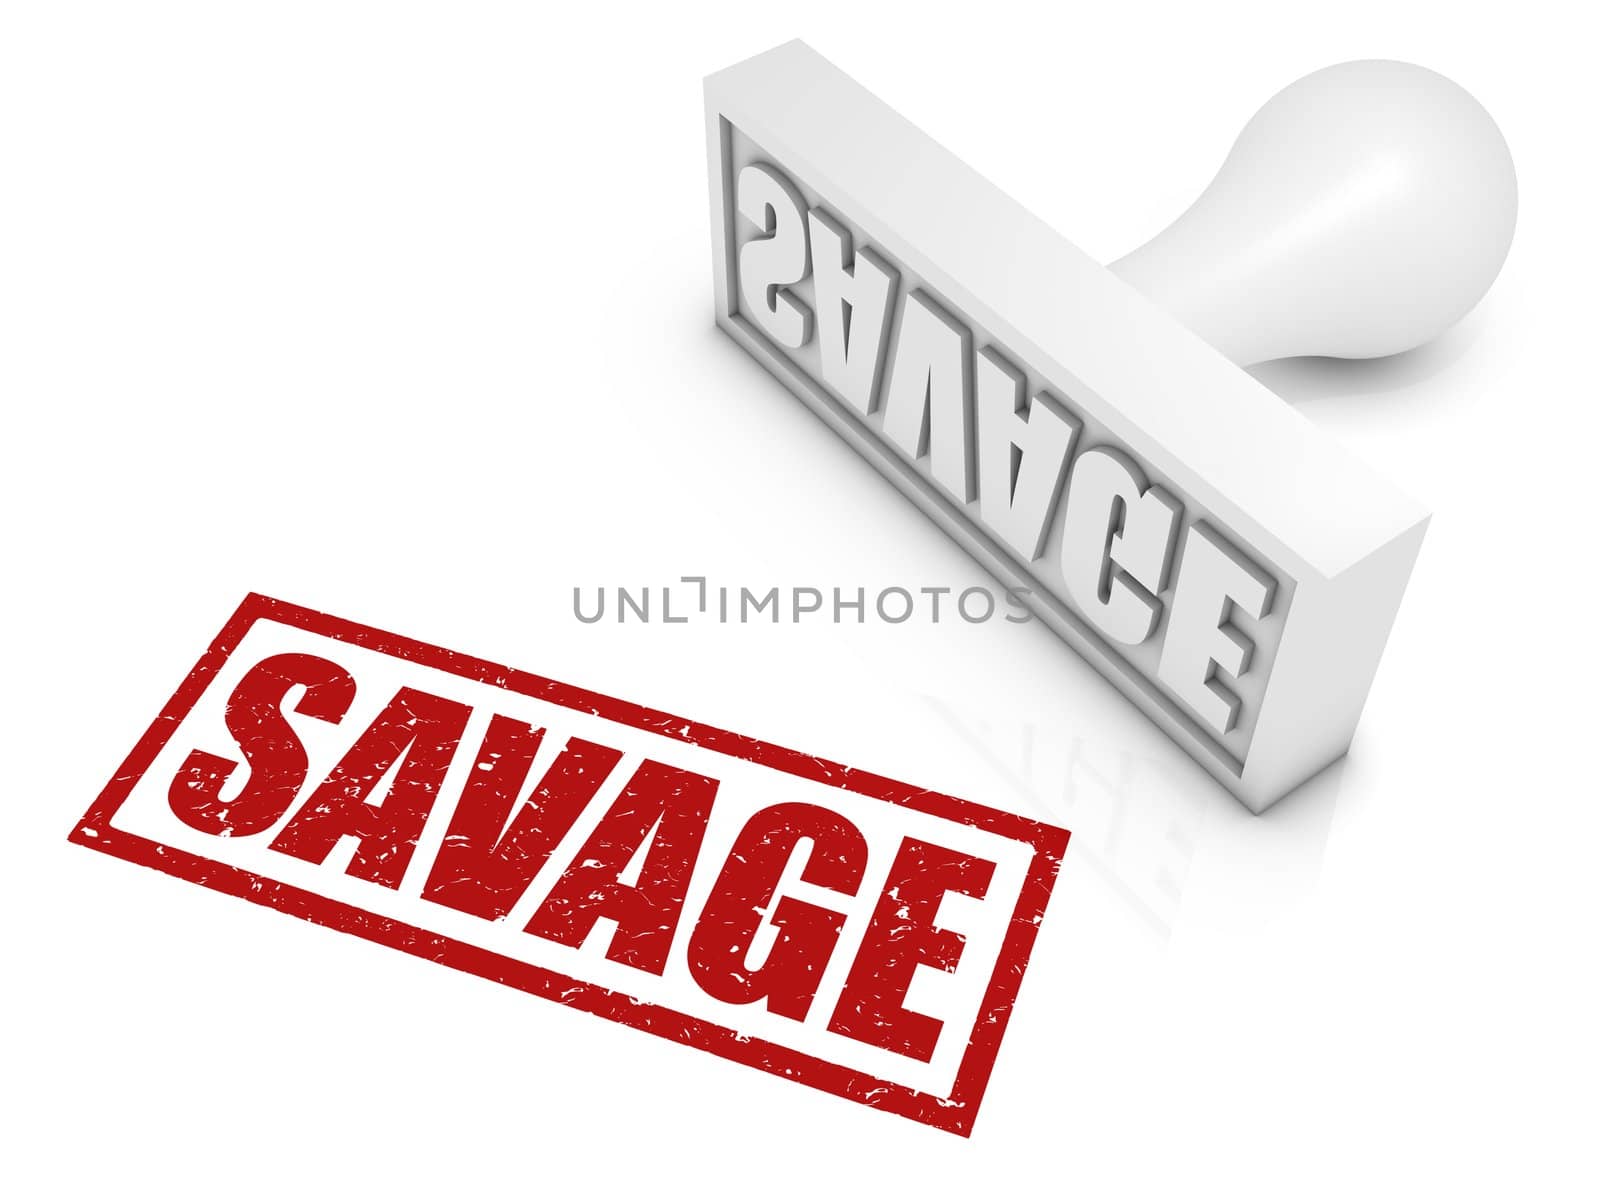 SAVAGE rubber stamp. Part of a series of stamp concepts.